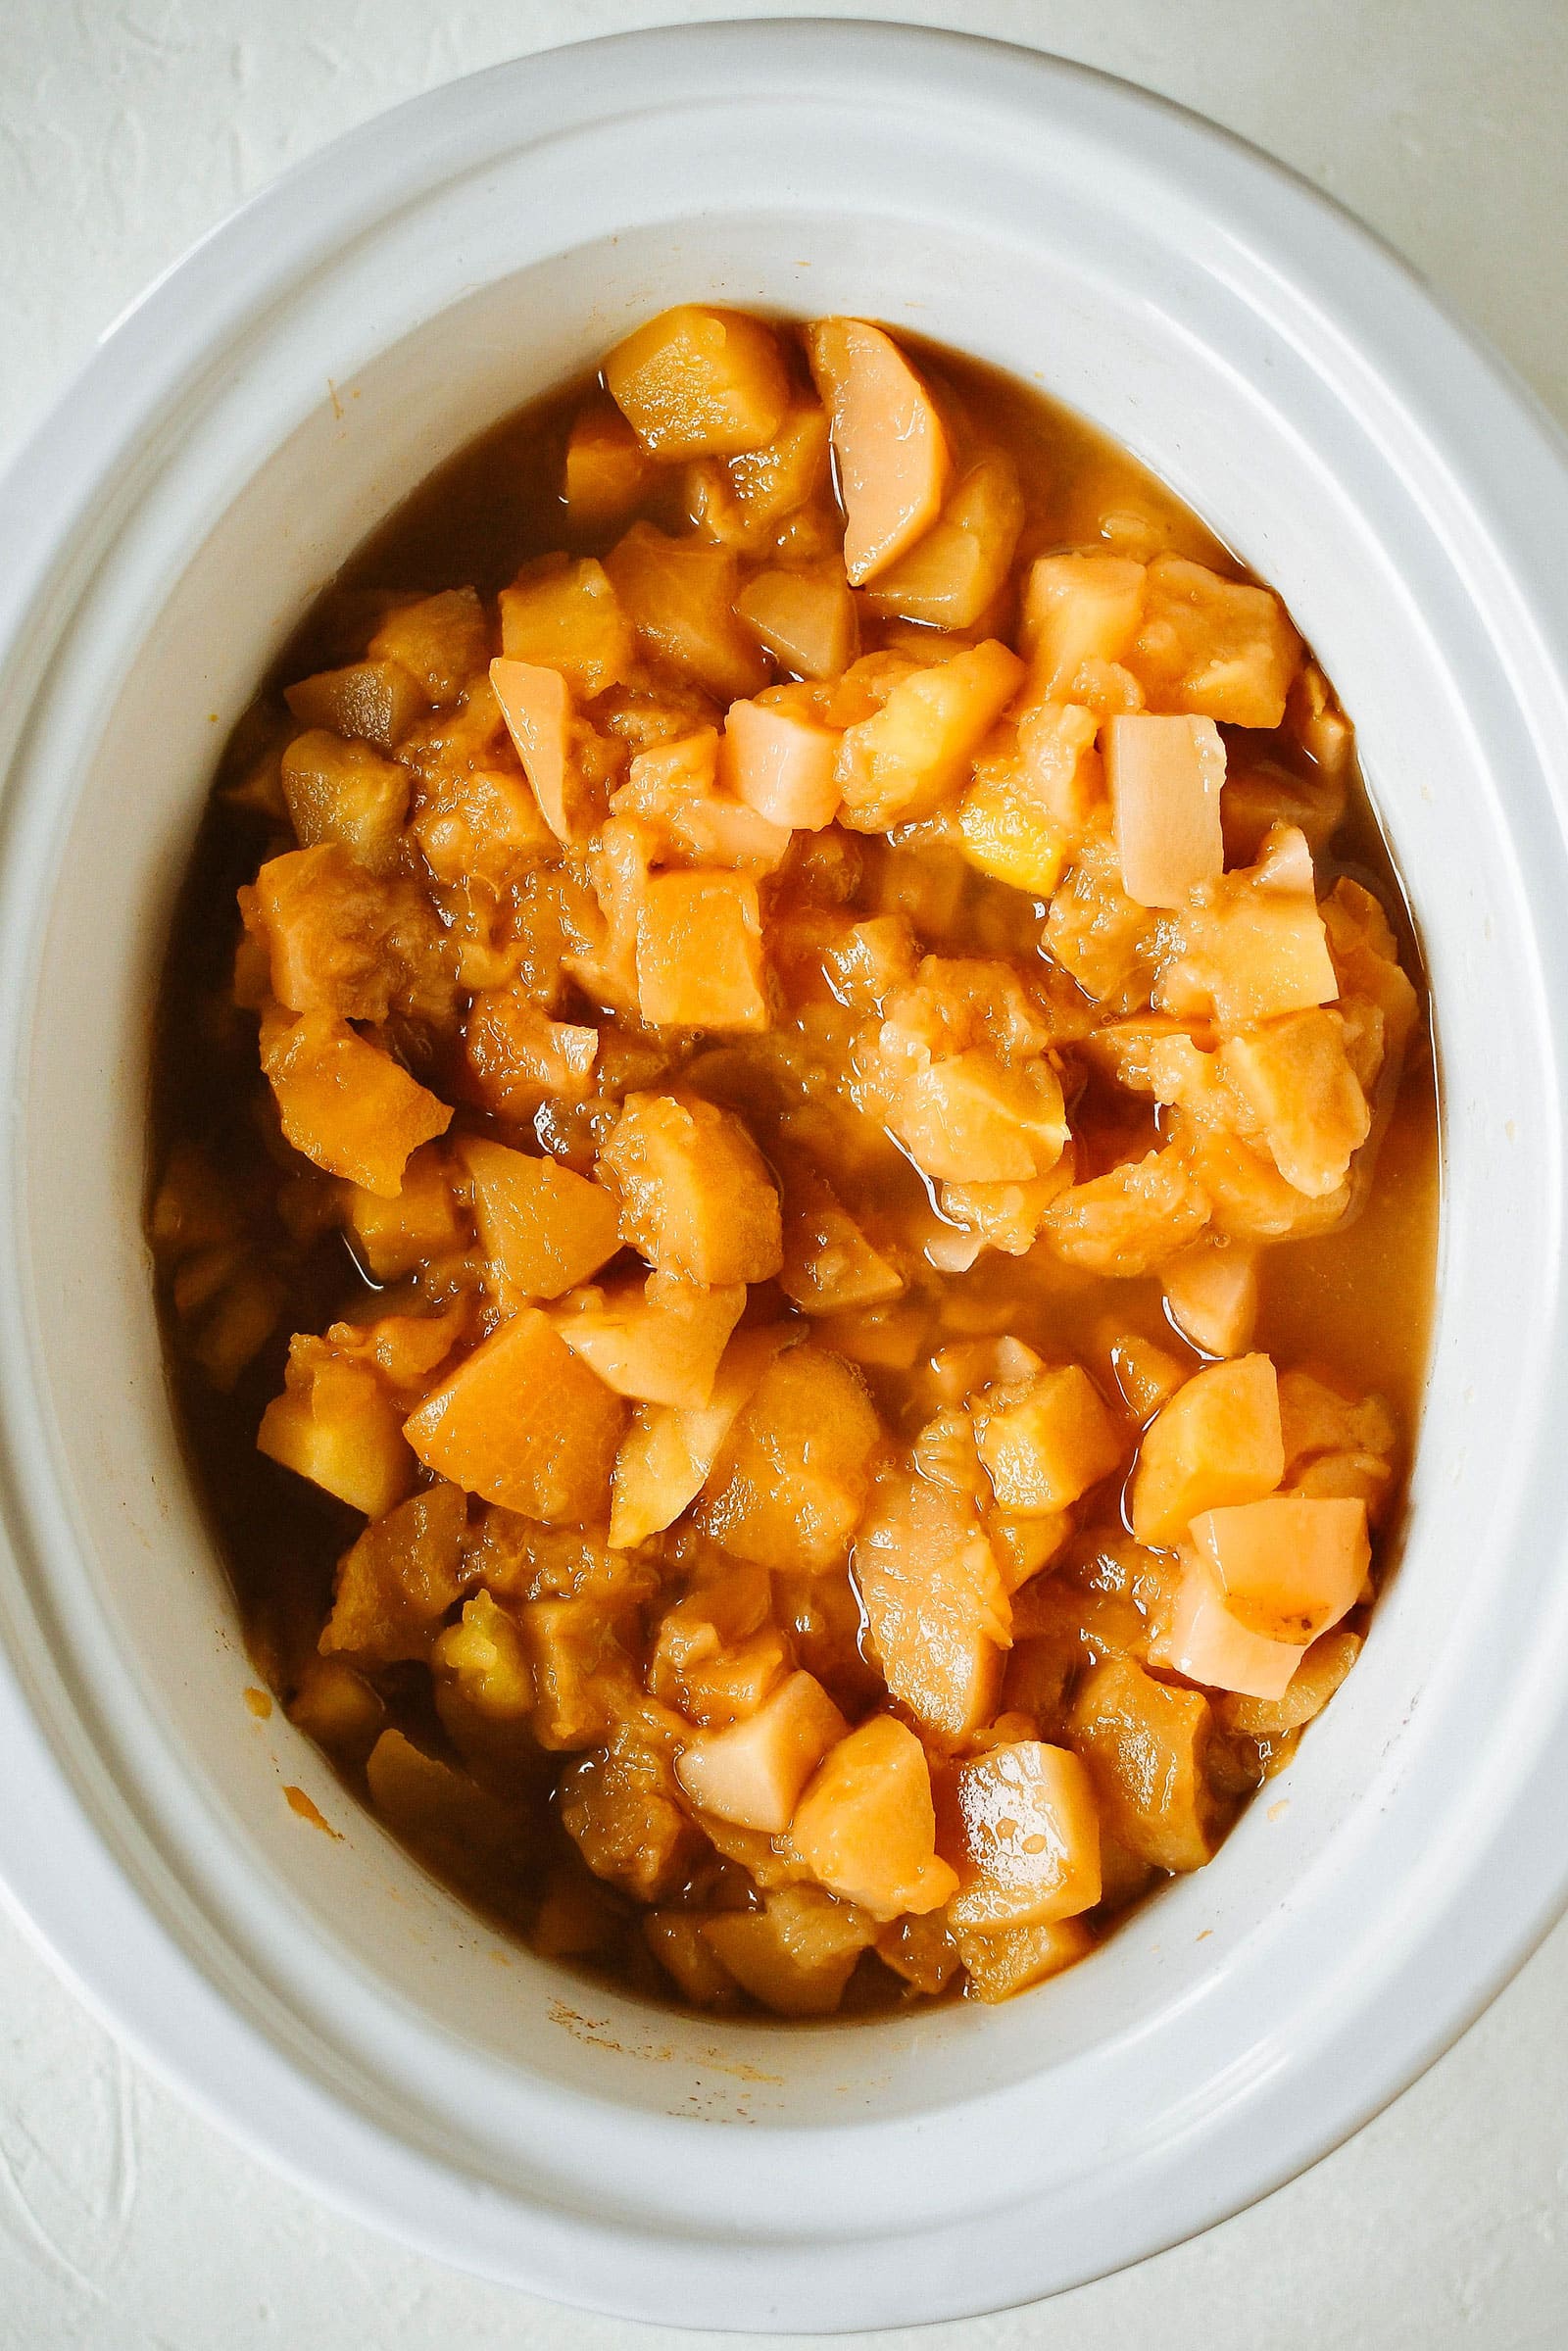 Slow cooker filled with chunky apple and pear mixture